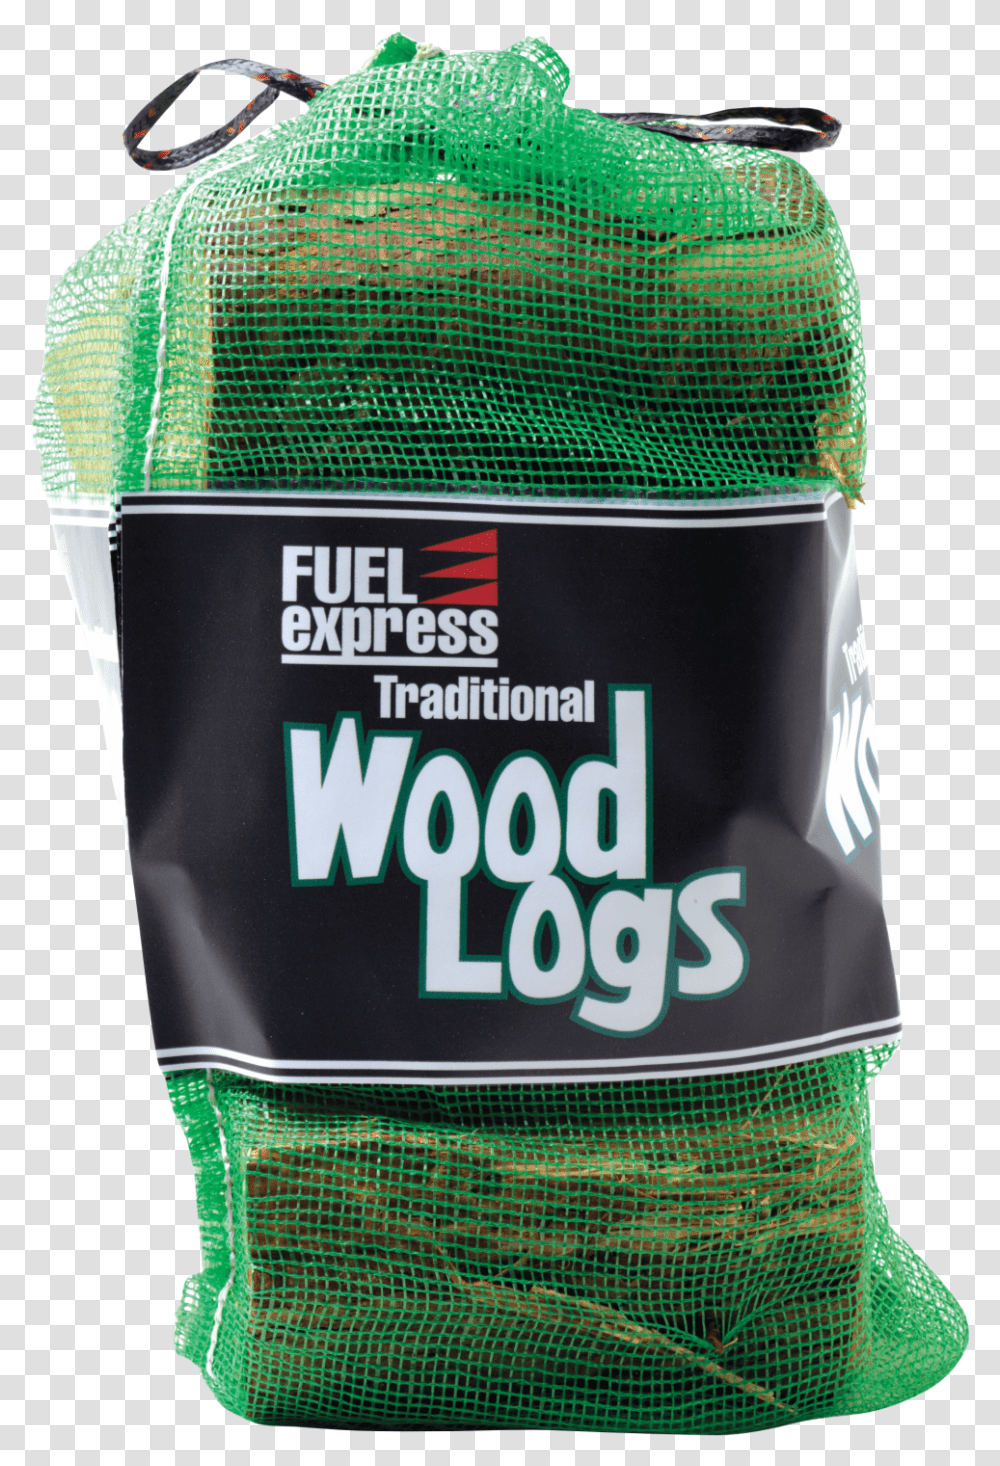 Fuel Express Natural Wood Logs Fuel Express, Electrical Device, Microphone, Person, Human Transparent Png